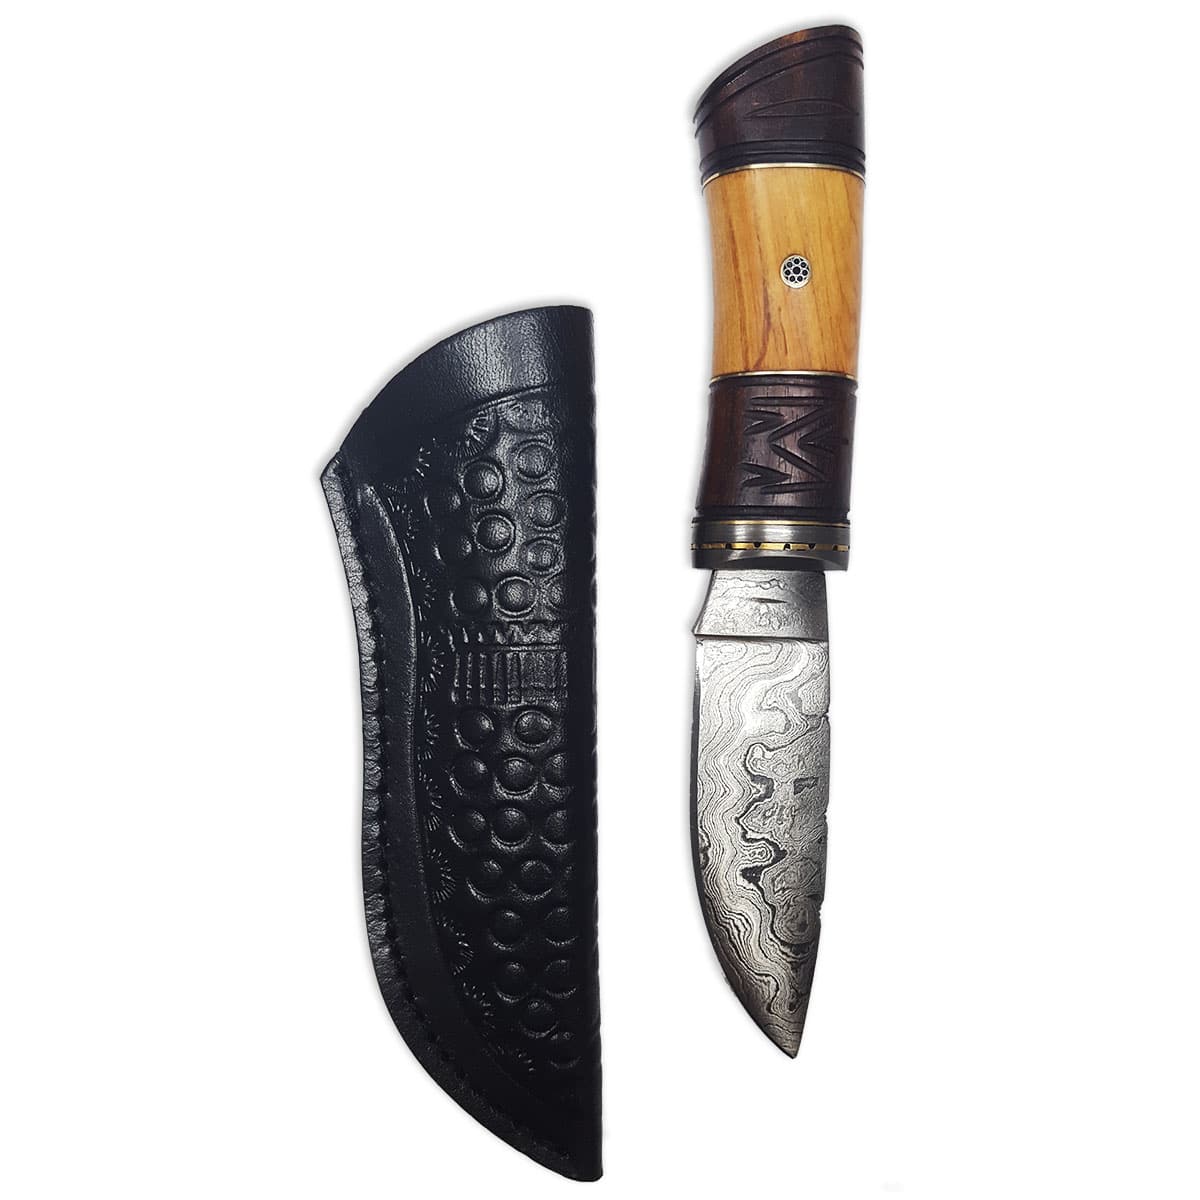 A Damascus Sgian Achlais with Rosewood and Olivewood Grip and a leather sheath.